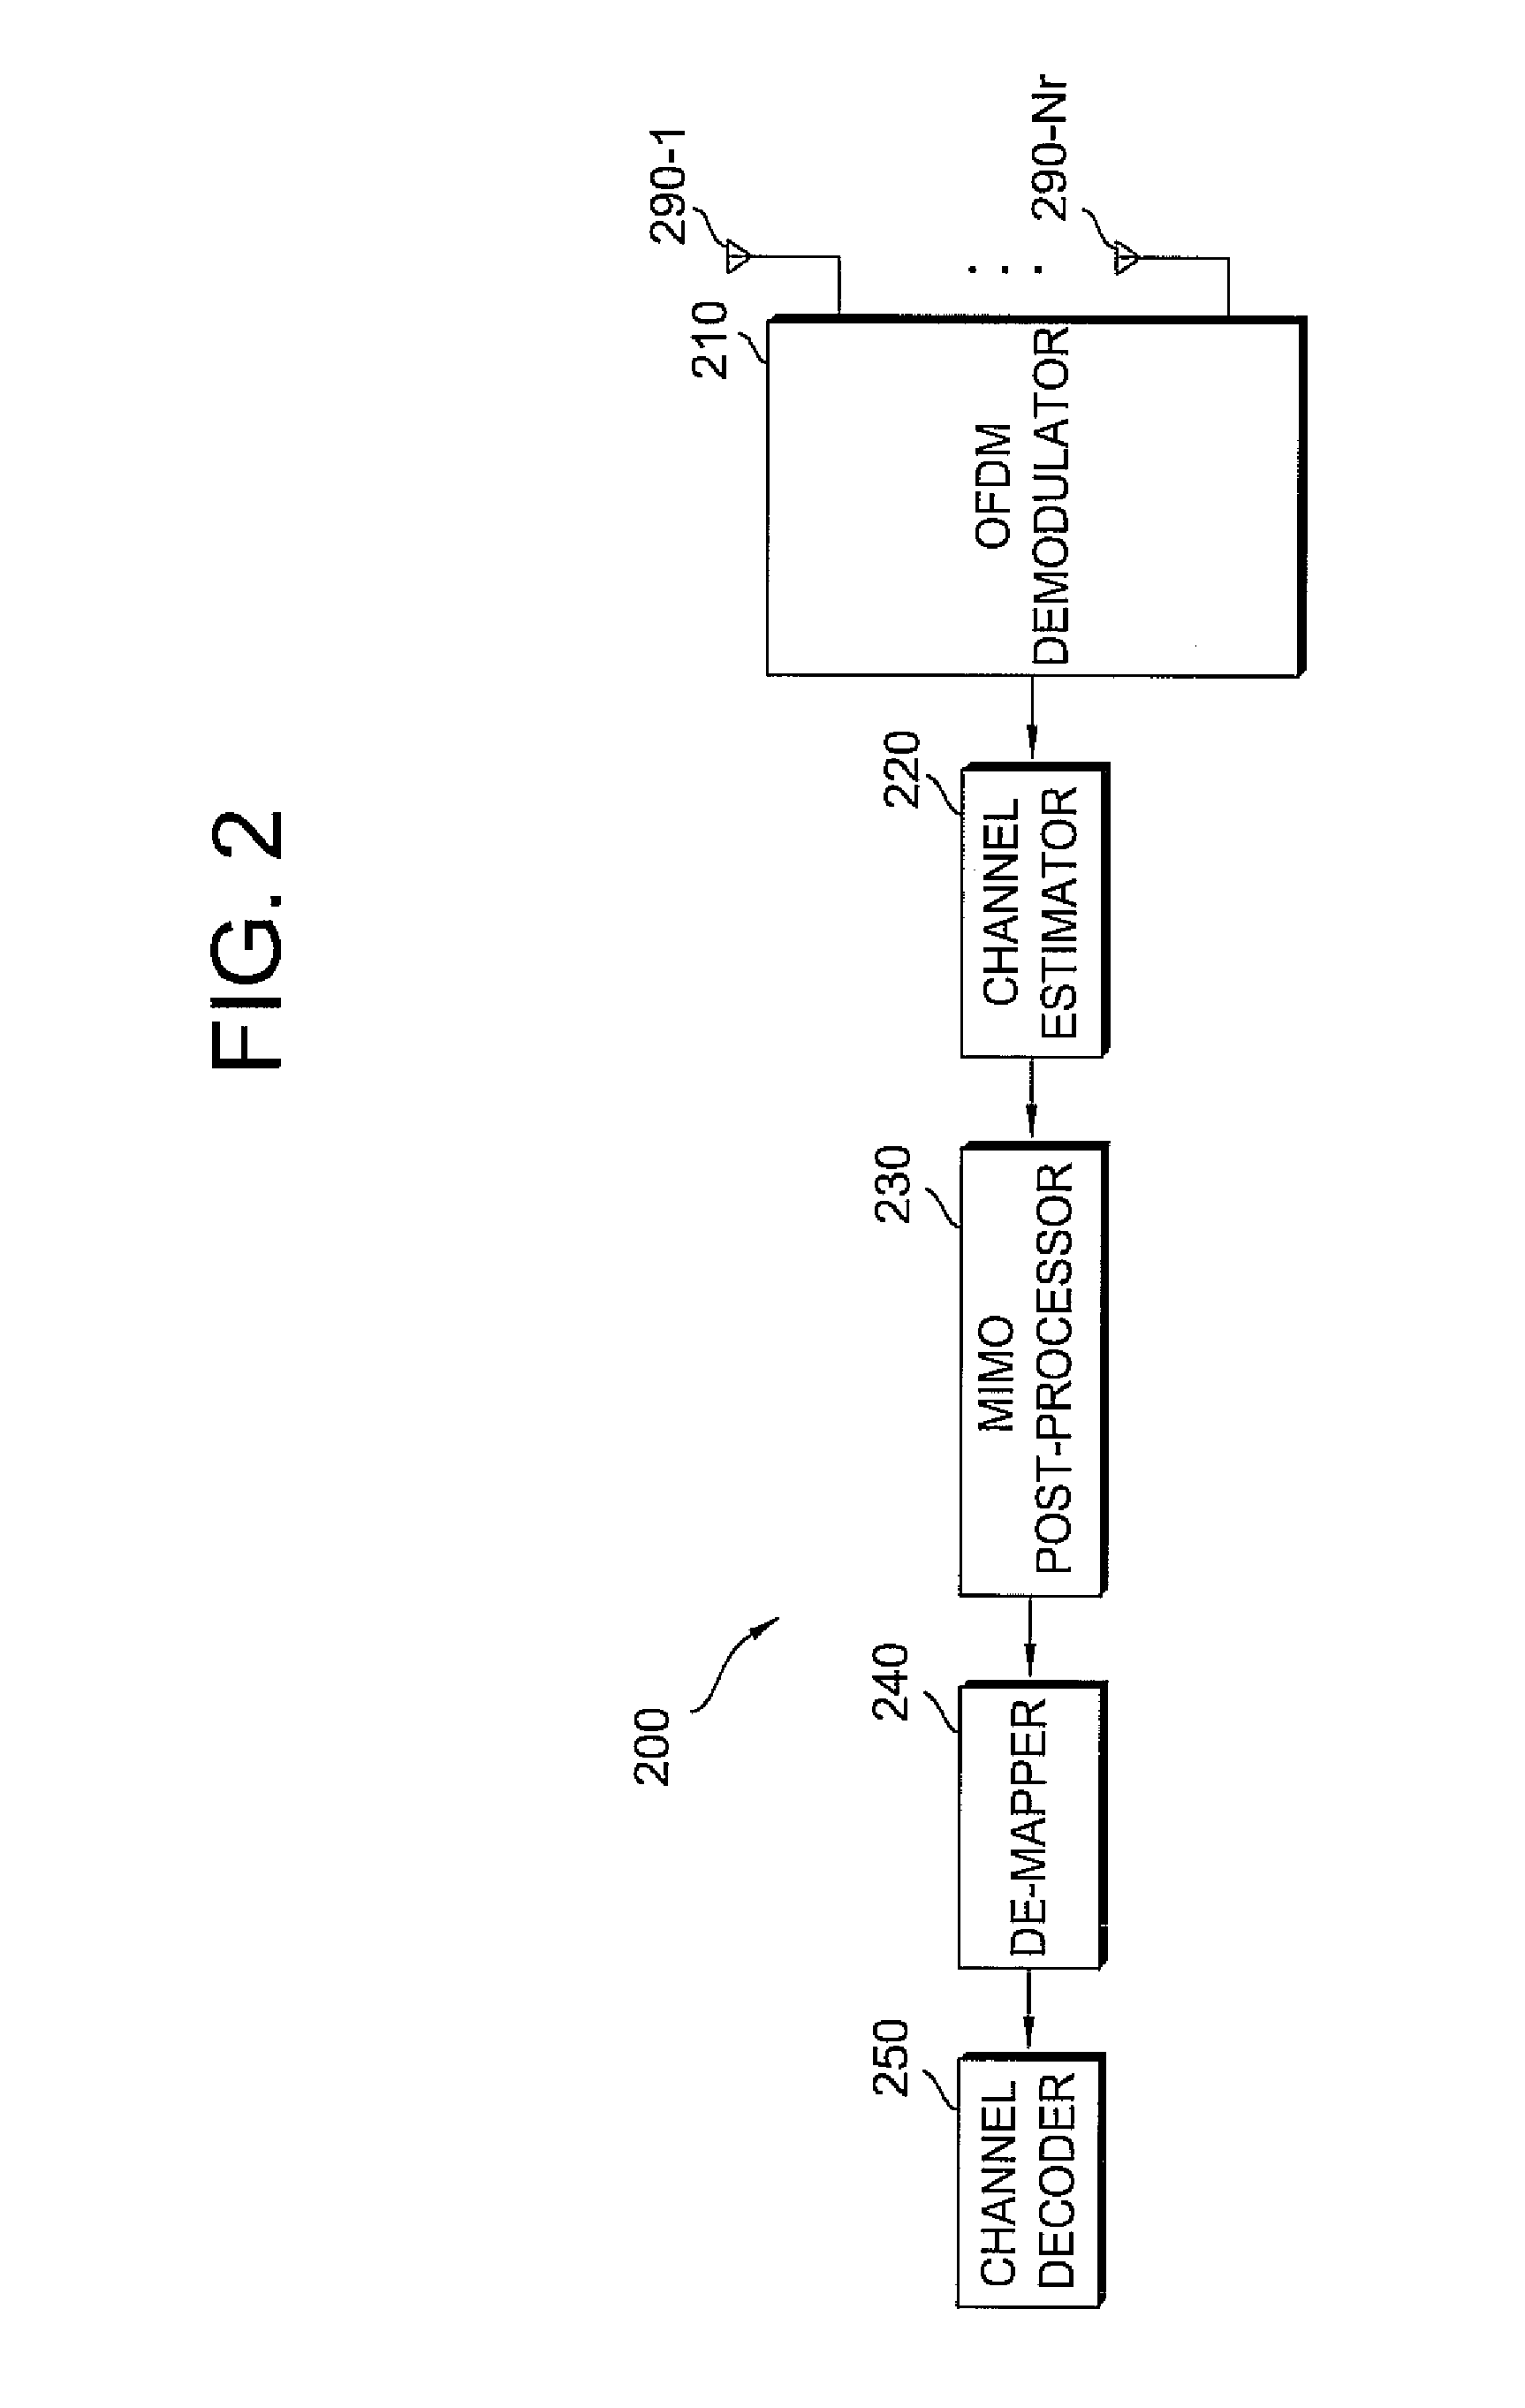 Method for allocating reference signals in MIMO system